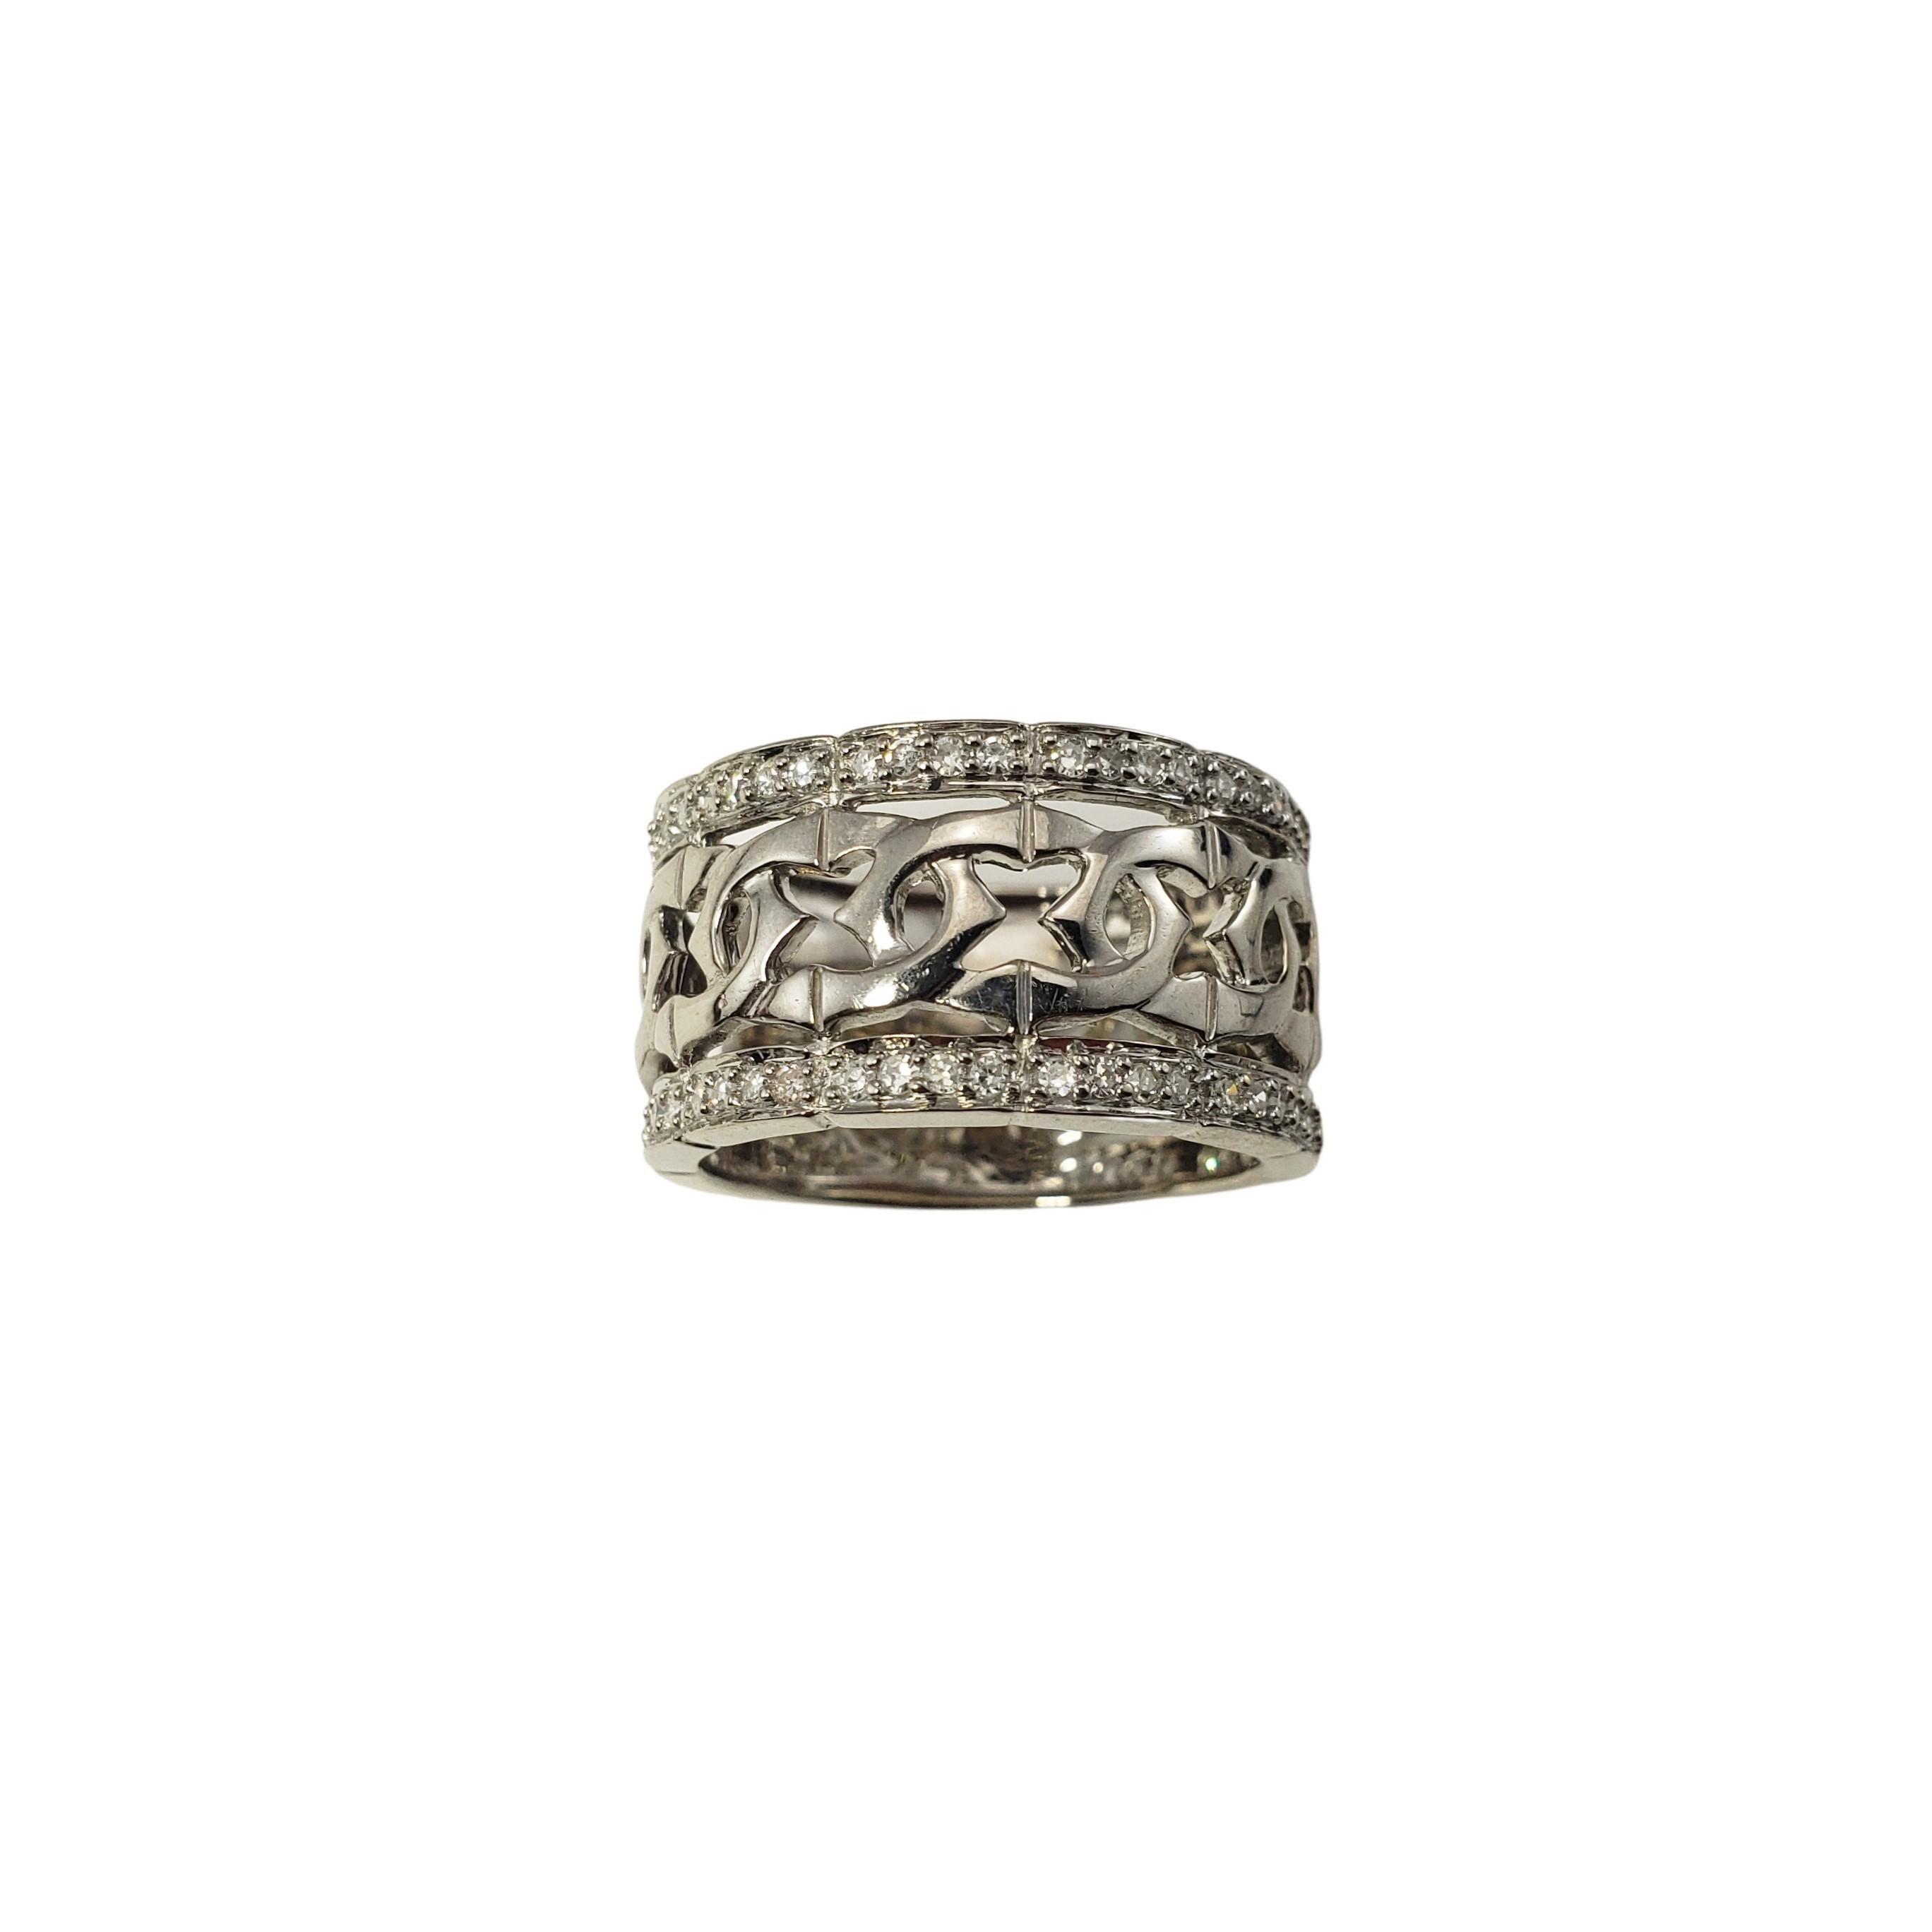 14 Karat White Gold and Diamond Band Ring Size 8 -

This elegant band features 36 round single cut diamonds set in beautifully detailed 14K white gold.  Width:  12 mm.

Approximate total diamond weight:  .36 ct.

Diamond color: G

Diamond clarity: